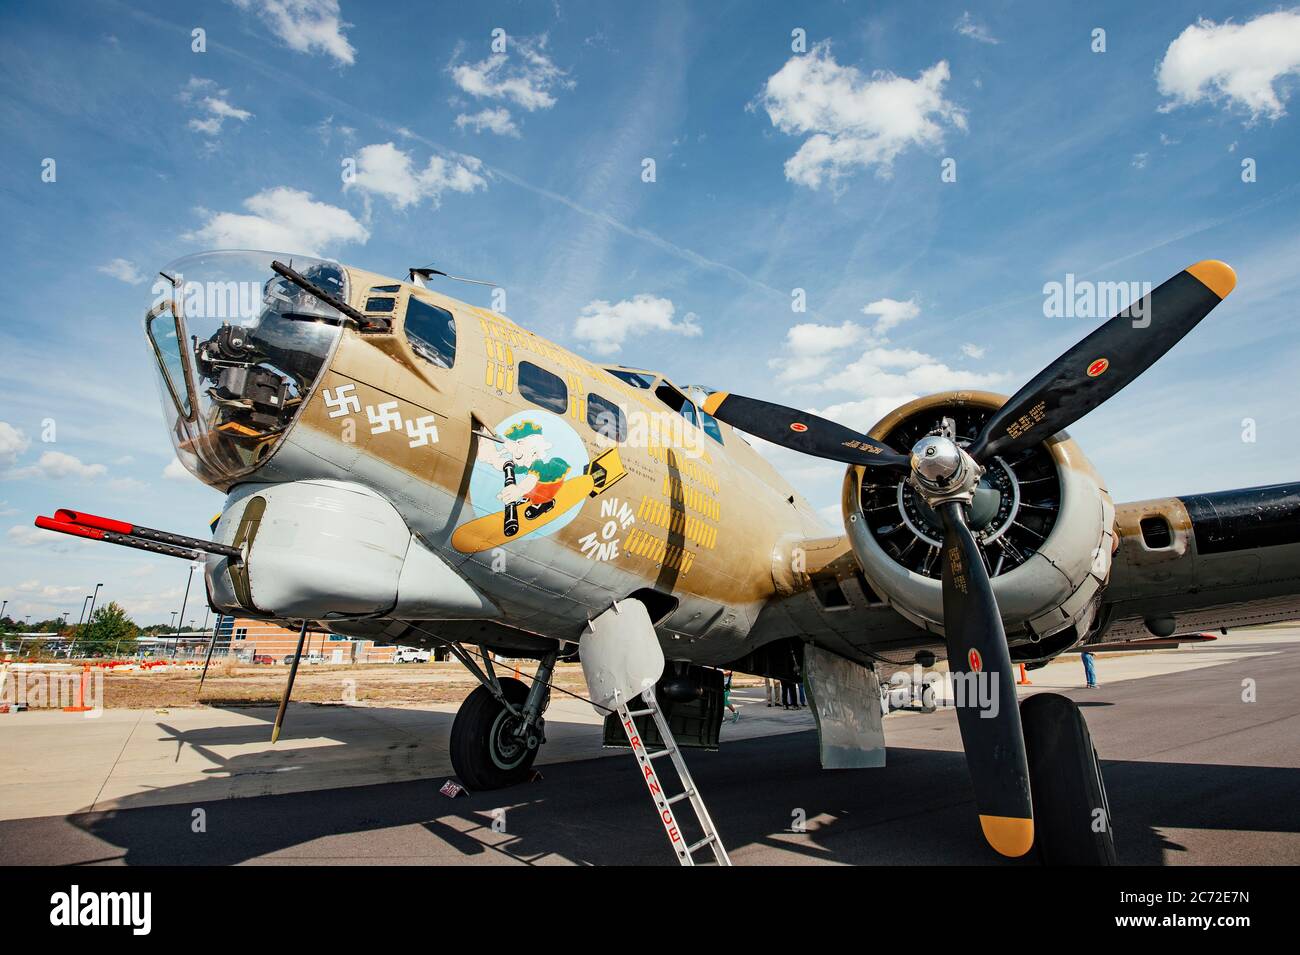 B-17 Flying Fortress a WWII heavy bomber showing nose art on static display. Stock Photo